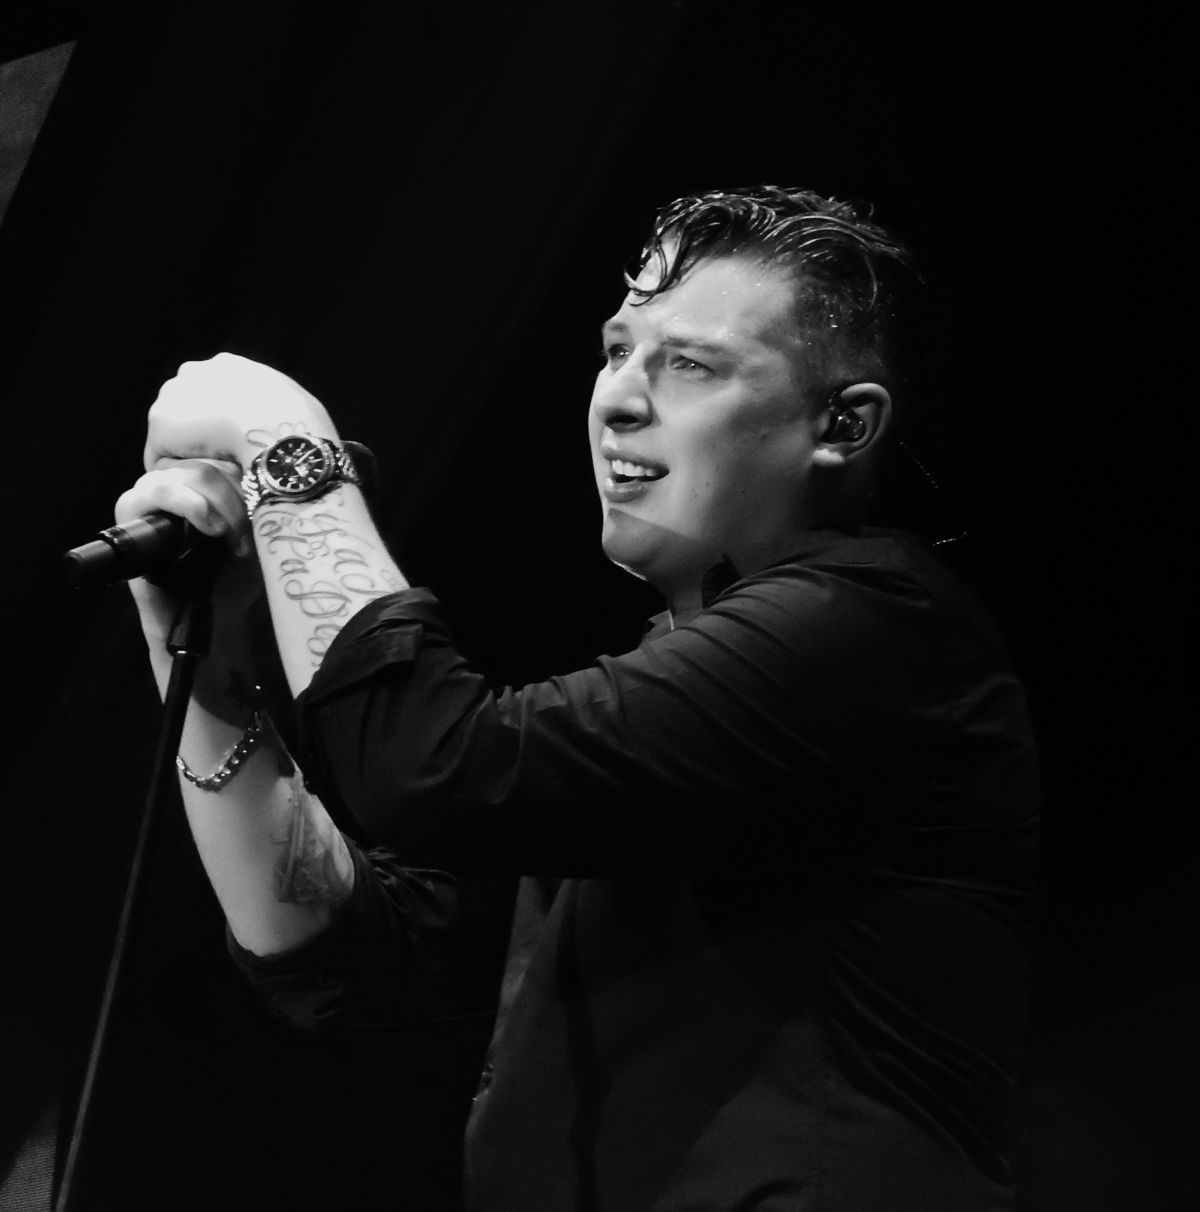 In conversation with John Newman